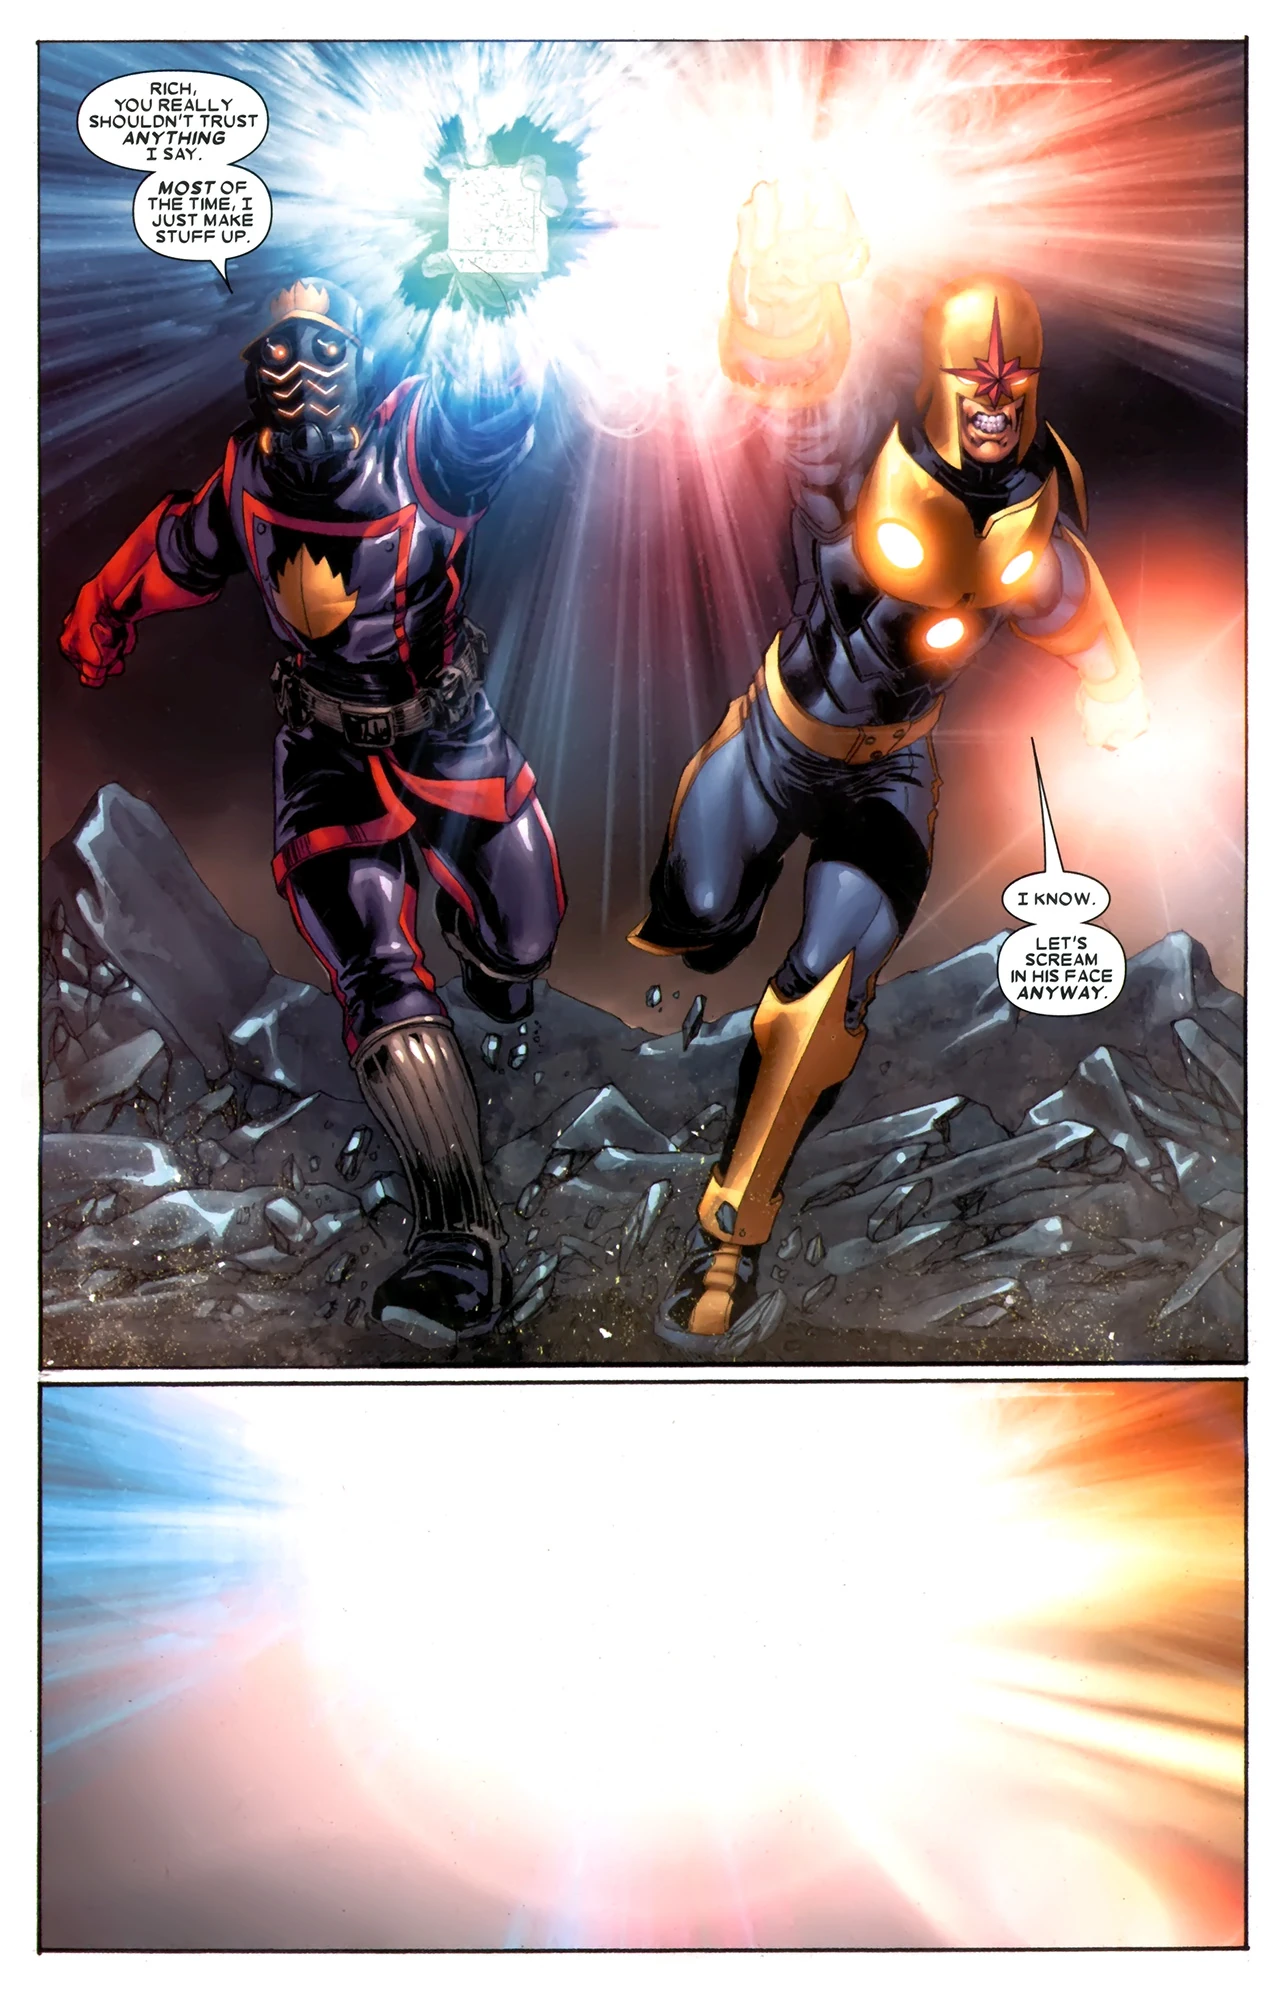 Star-Lord and Nova sacrifice themselves to prevent Thanos from escaping the Cancerverse in Thanos Imperative Vol. 1 #6 (2010), Marvel Comics. Words by Dan Abnett and Andy Lanning, art by Miguel Sepulveda, Jay David Ramos, and Joe Caramagna.